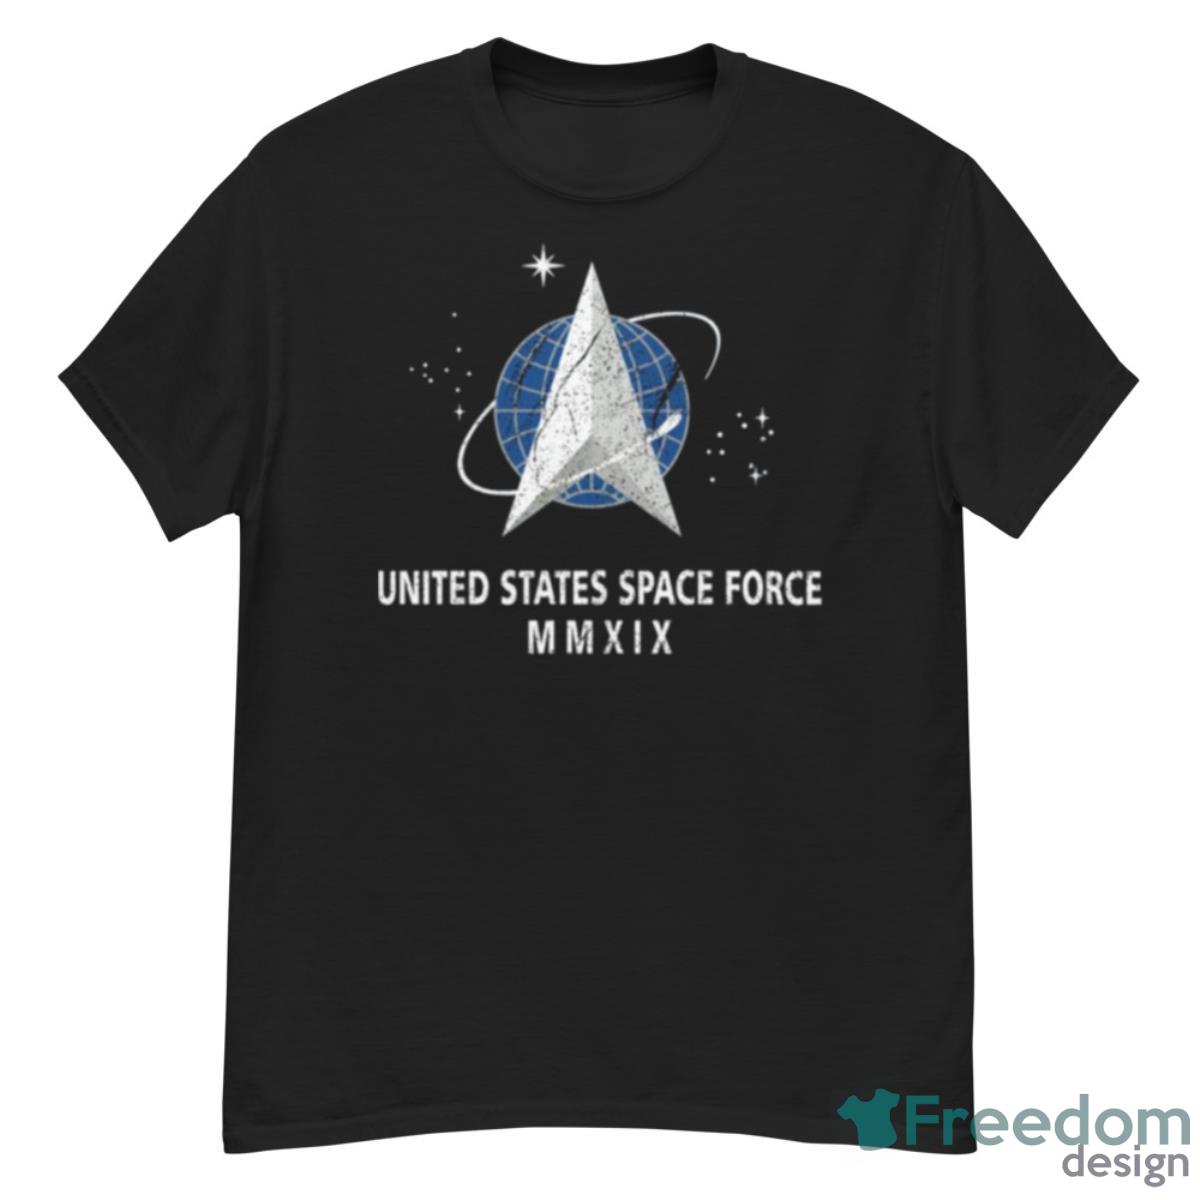 New United States Space Force Flag Distressed Shirt - G500 Men’s Classic T-Shirt